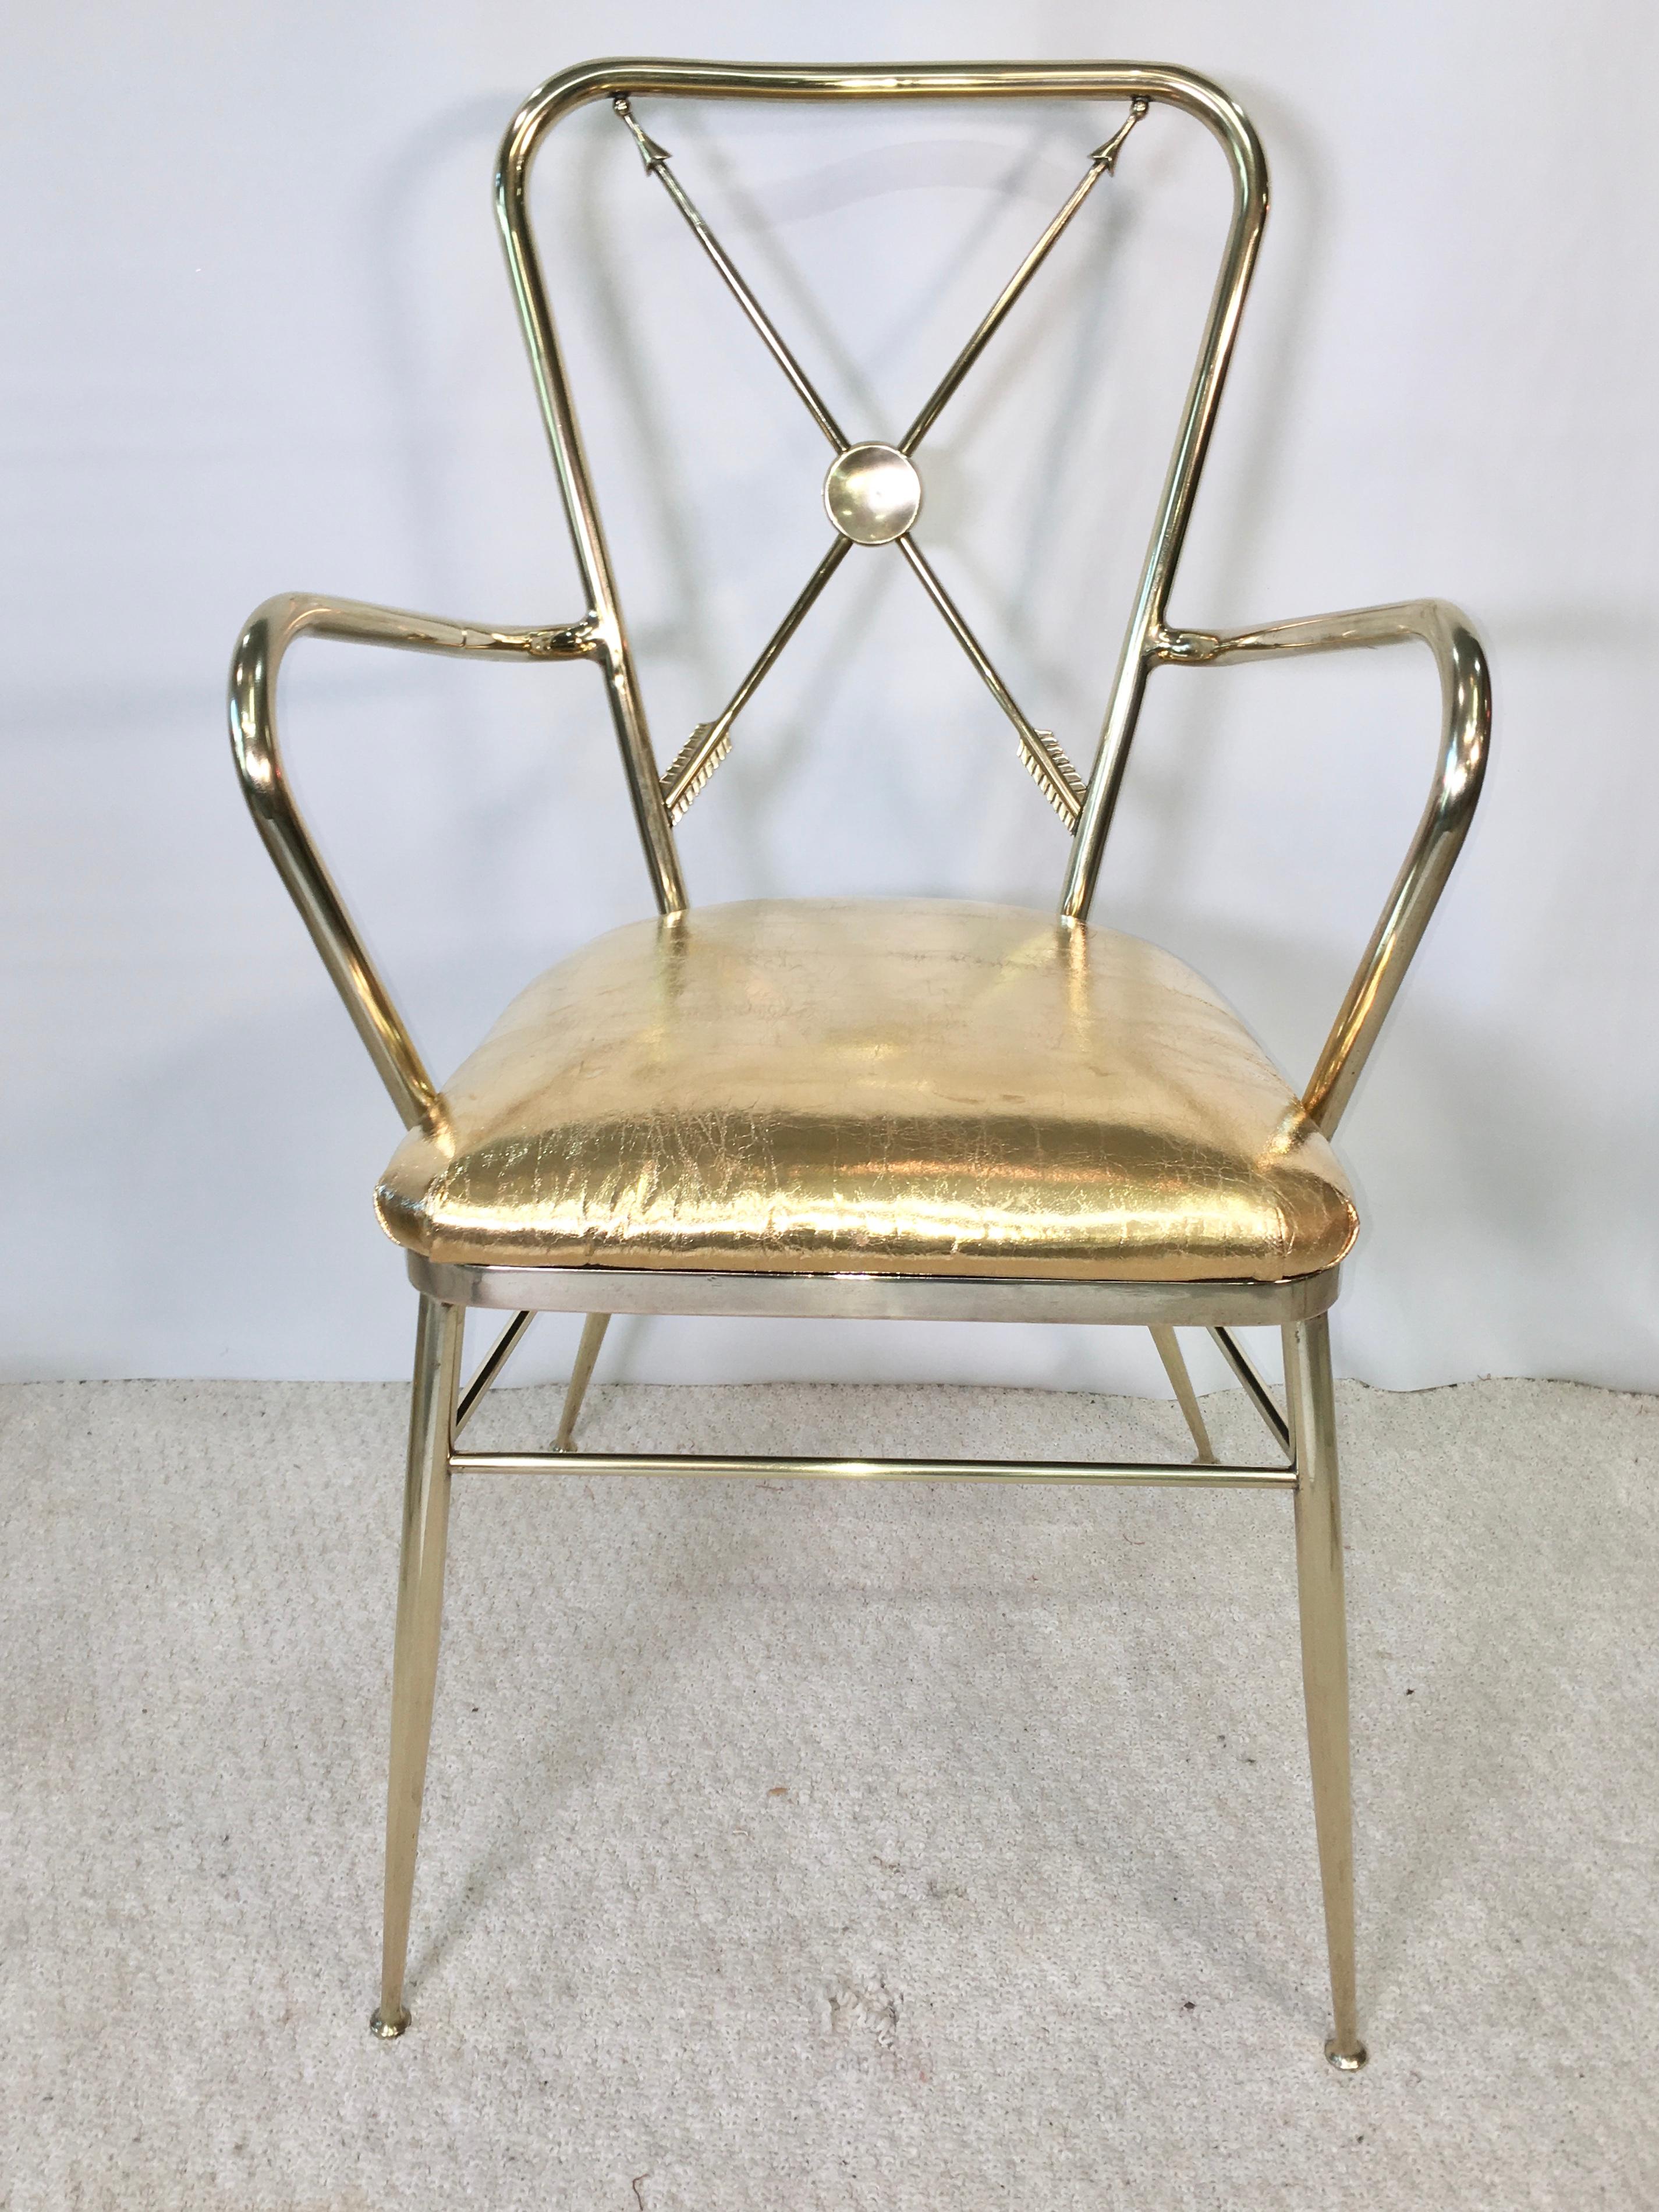 1950s Italian brass Chiavari armchair with crossed arrows motif in the style of Gio Ponti, Tomaso Buzzi and Marc du Plantier.
Seat cushion newly upholstered in vintage gold metallic leather. Hand polished to a mirror finish.
The crossed arrows